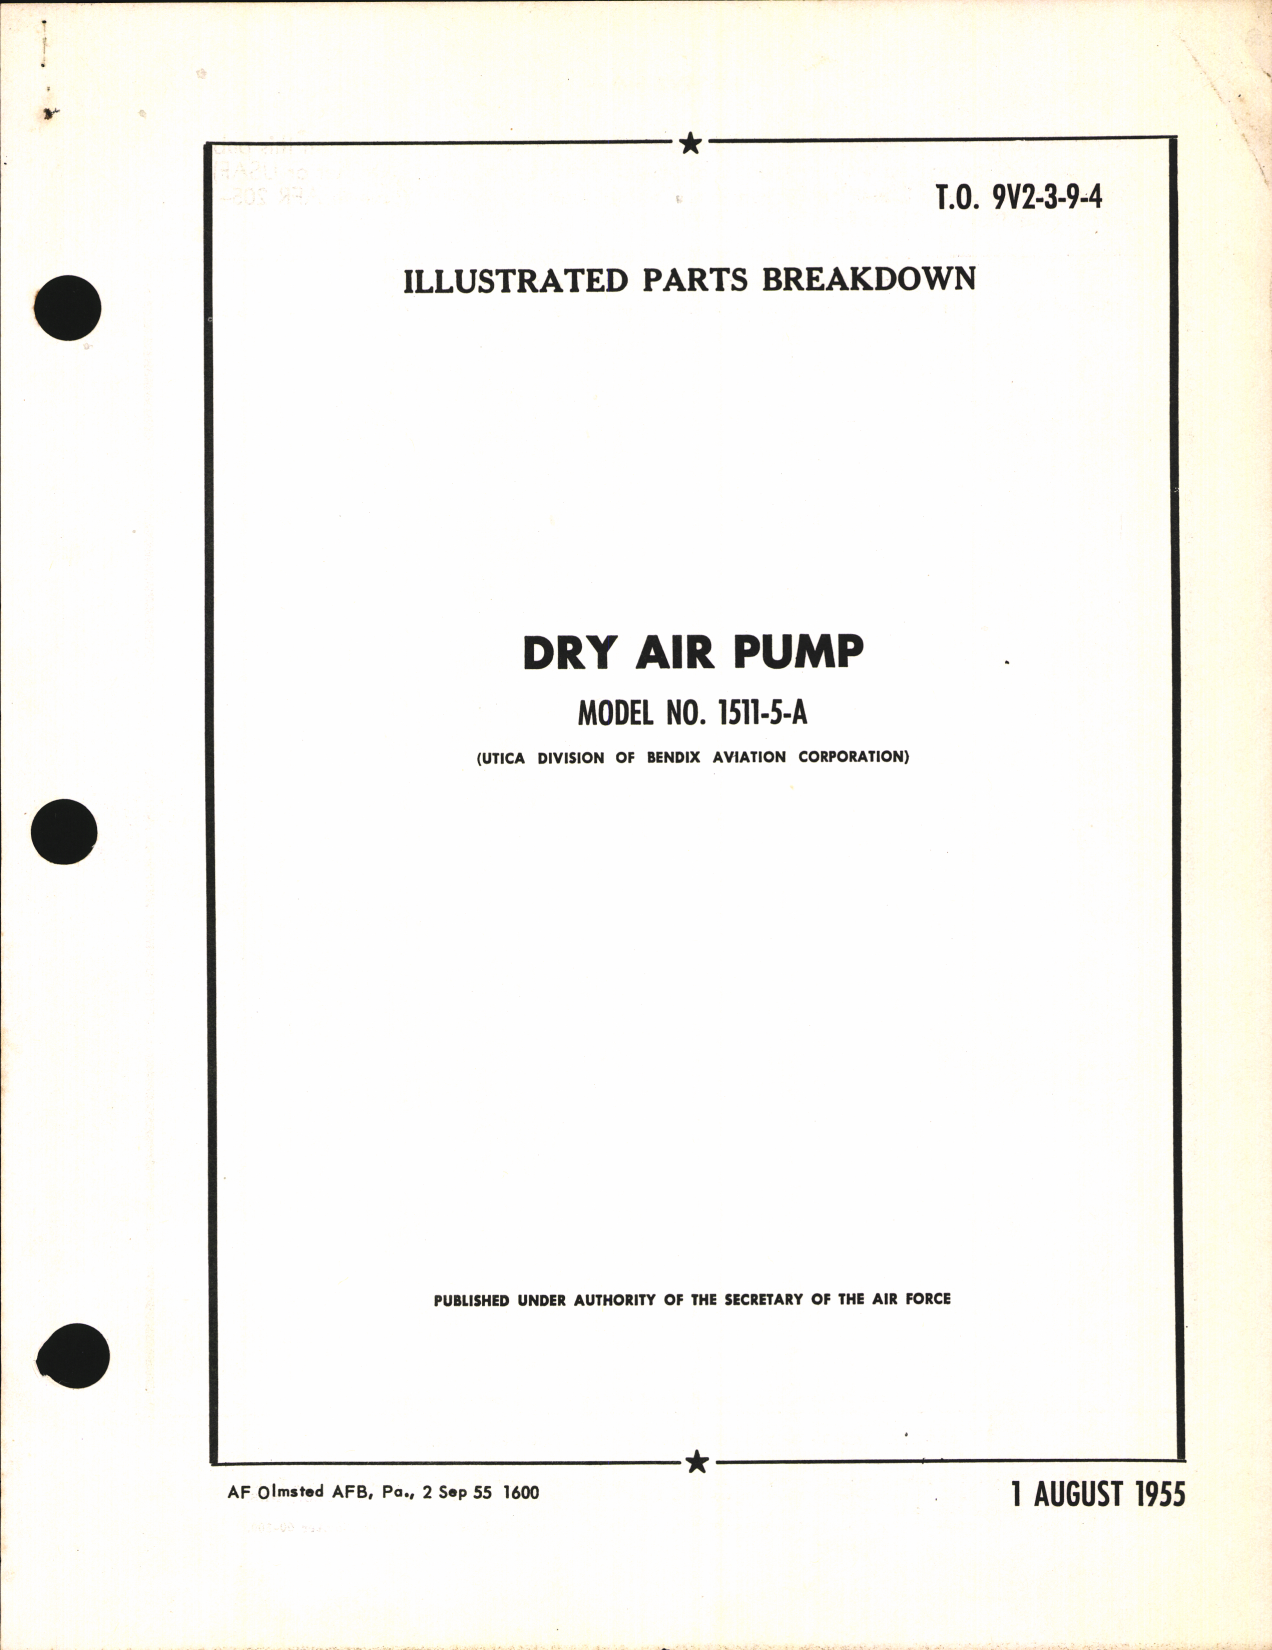 Sample page 1 from AirCorps Library document: Illustrated Parts Breakdown for Dry Air Pump Model No. 1511-5-A